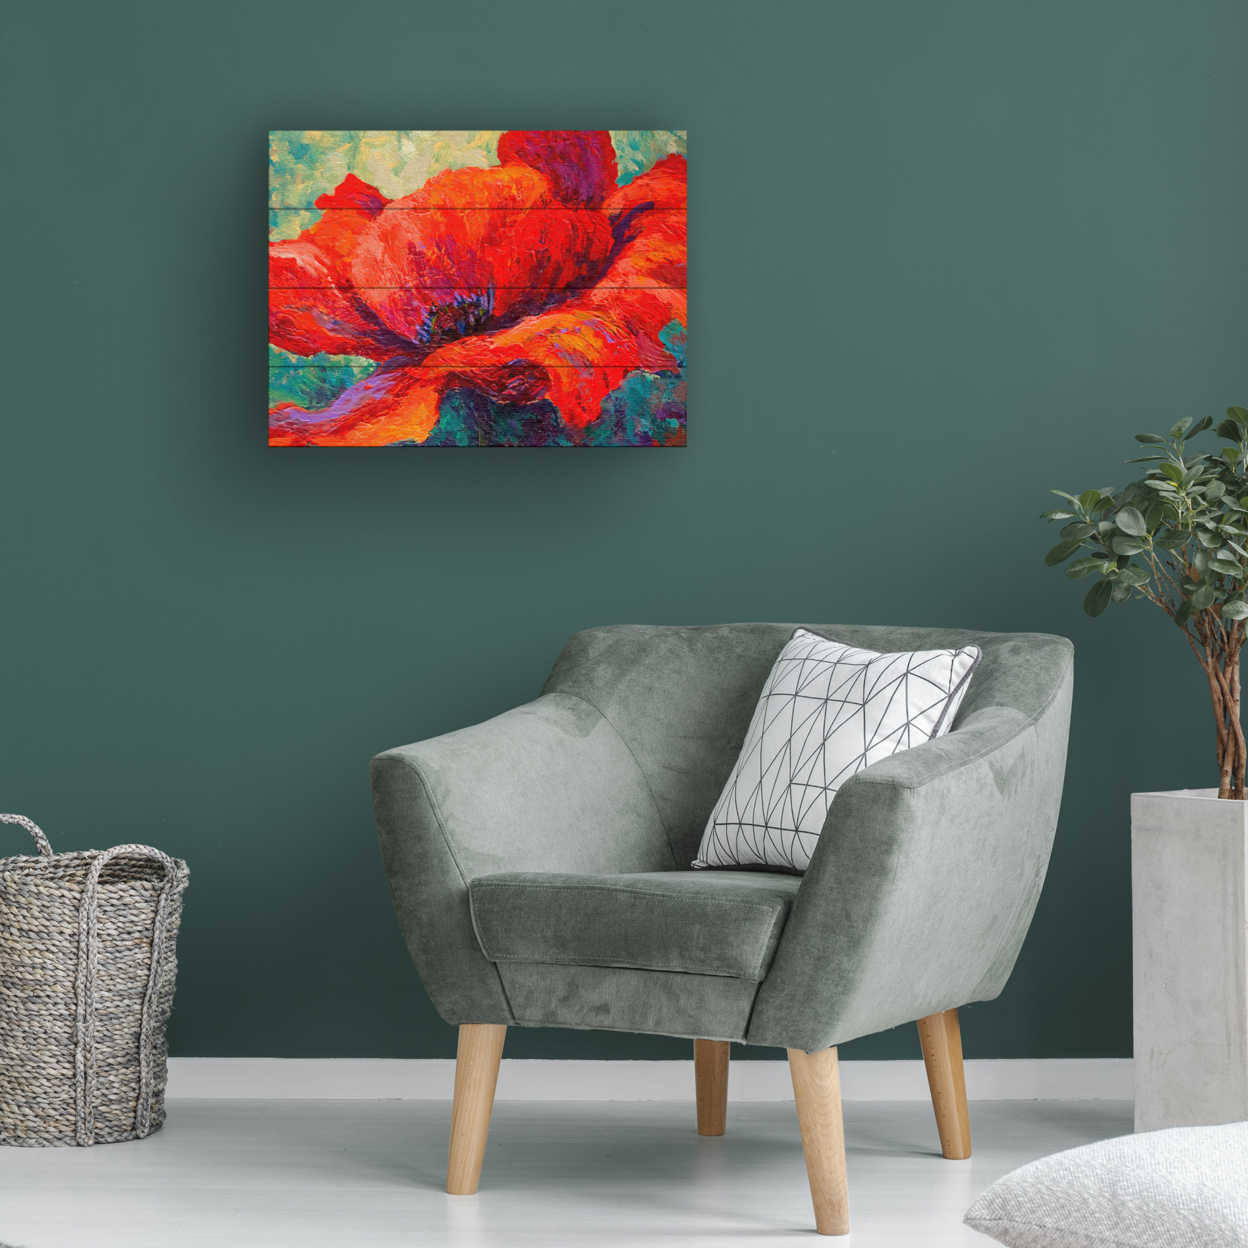 Wall Art 12 X 16 Inches Titled Red Poppy III Ready To Hang Printed On Wooden Planks